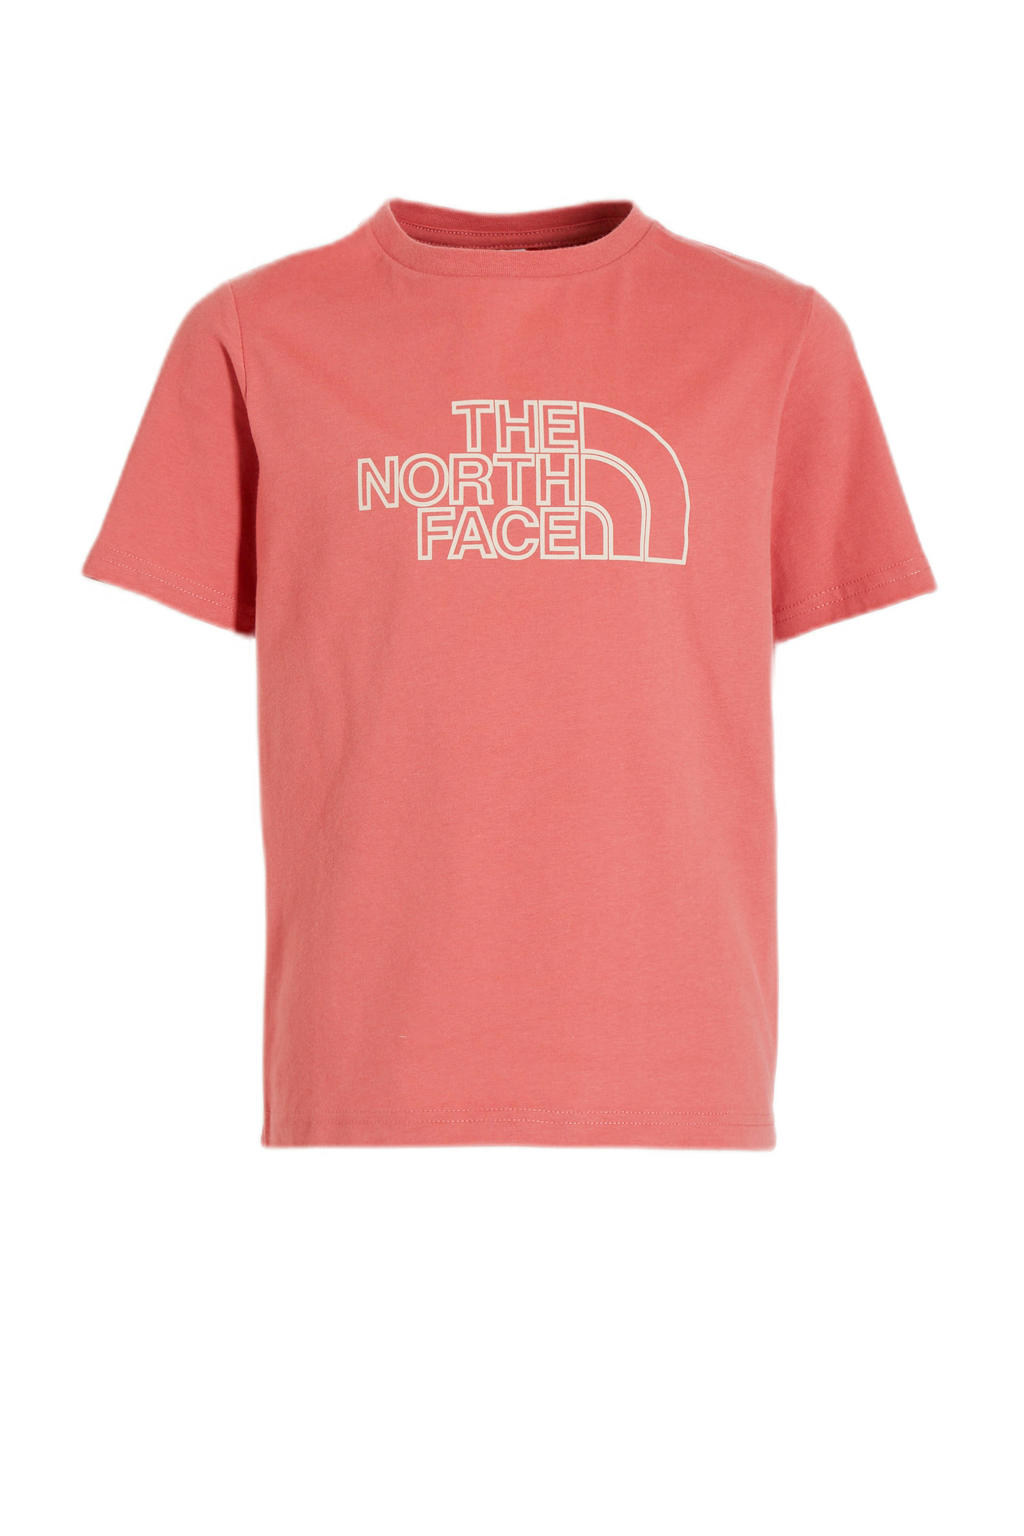 The North Face T-shirt met logo roze